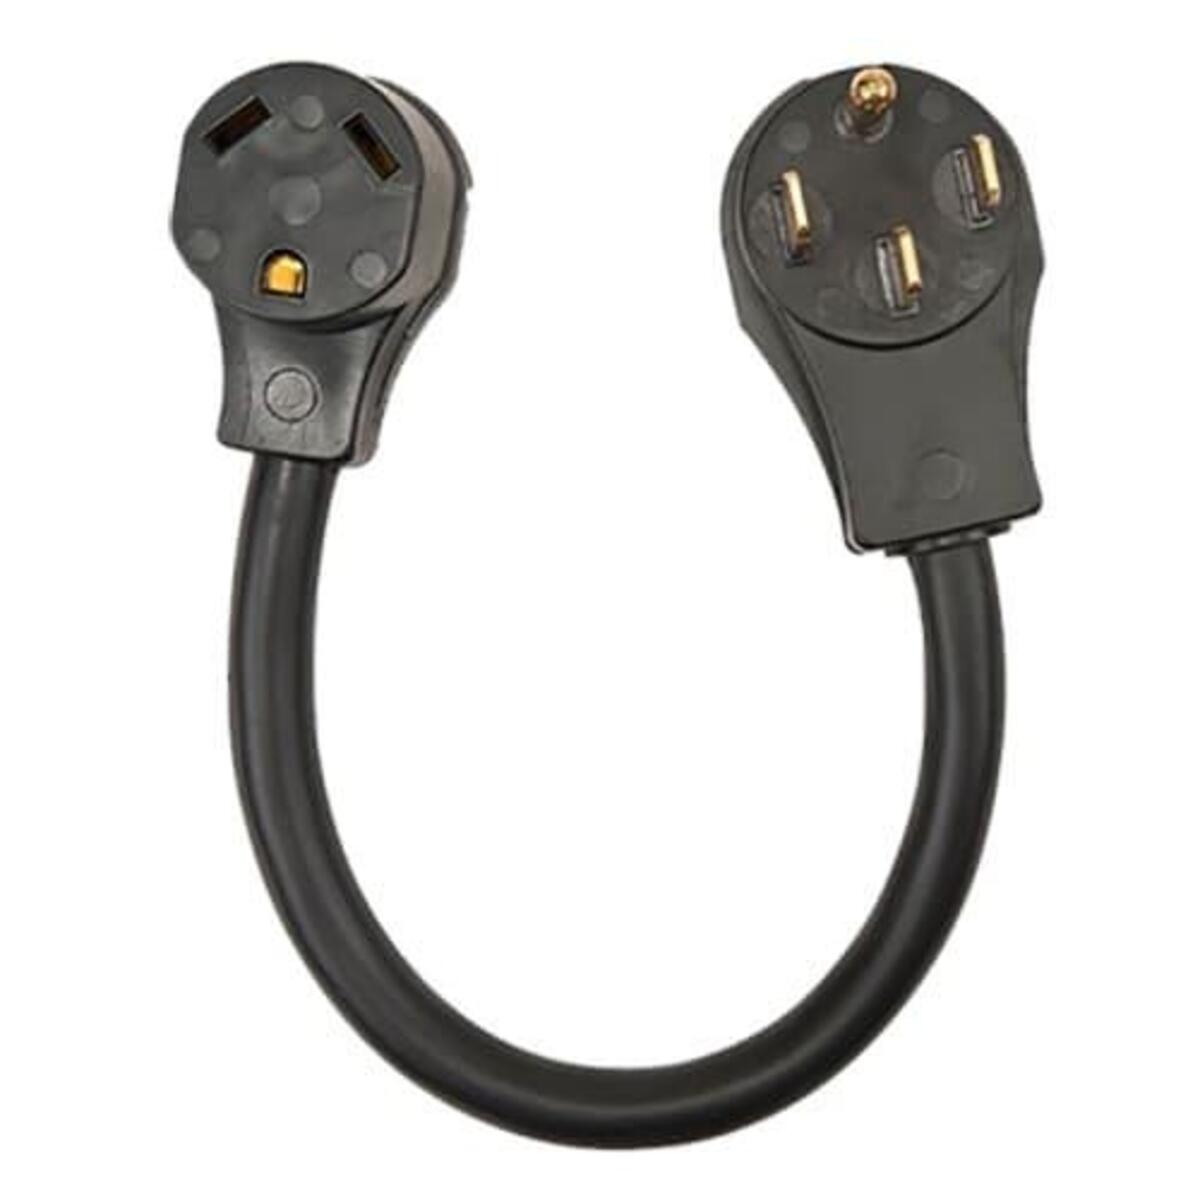 Southwire 50AM30AF18 Surge Guard RV Power Cord Adapter 50A Male To 30A  Female 18 10/3 Cord 120V